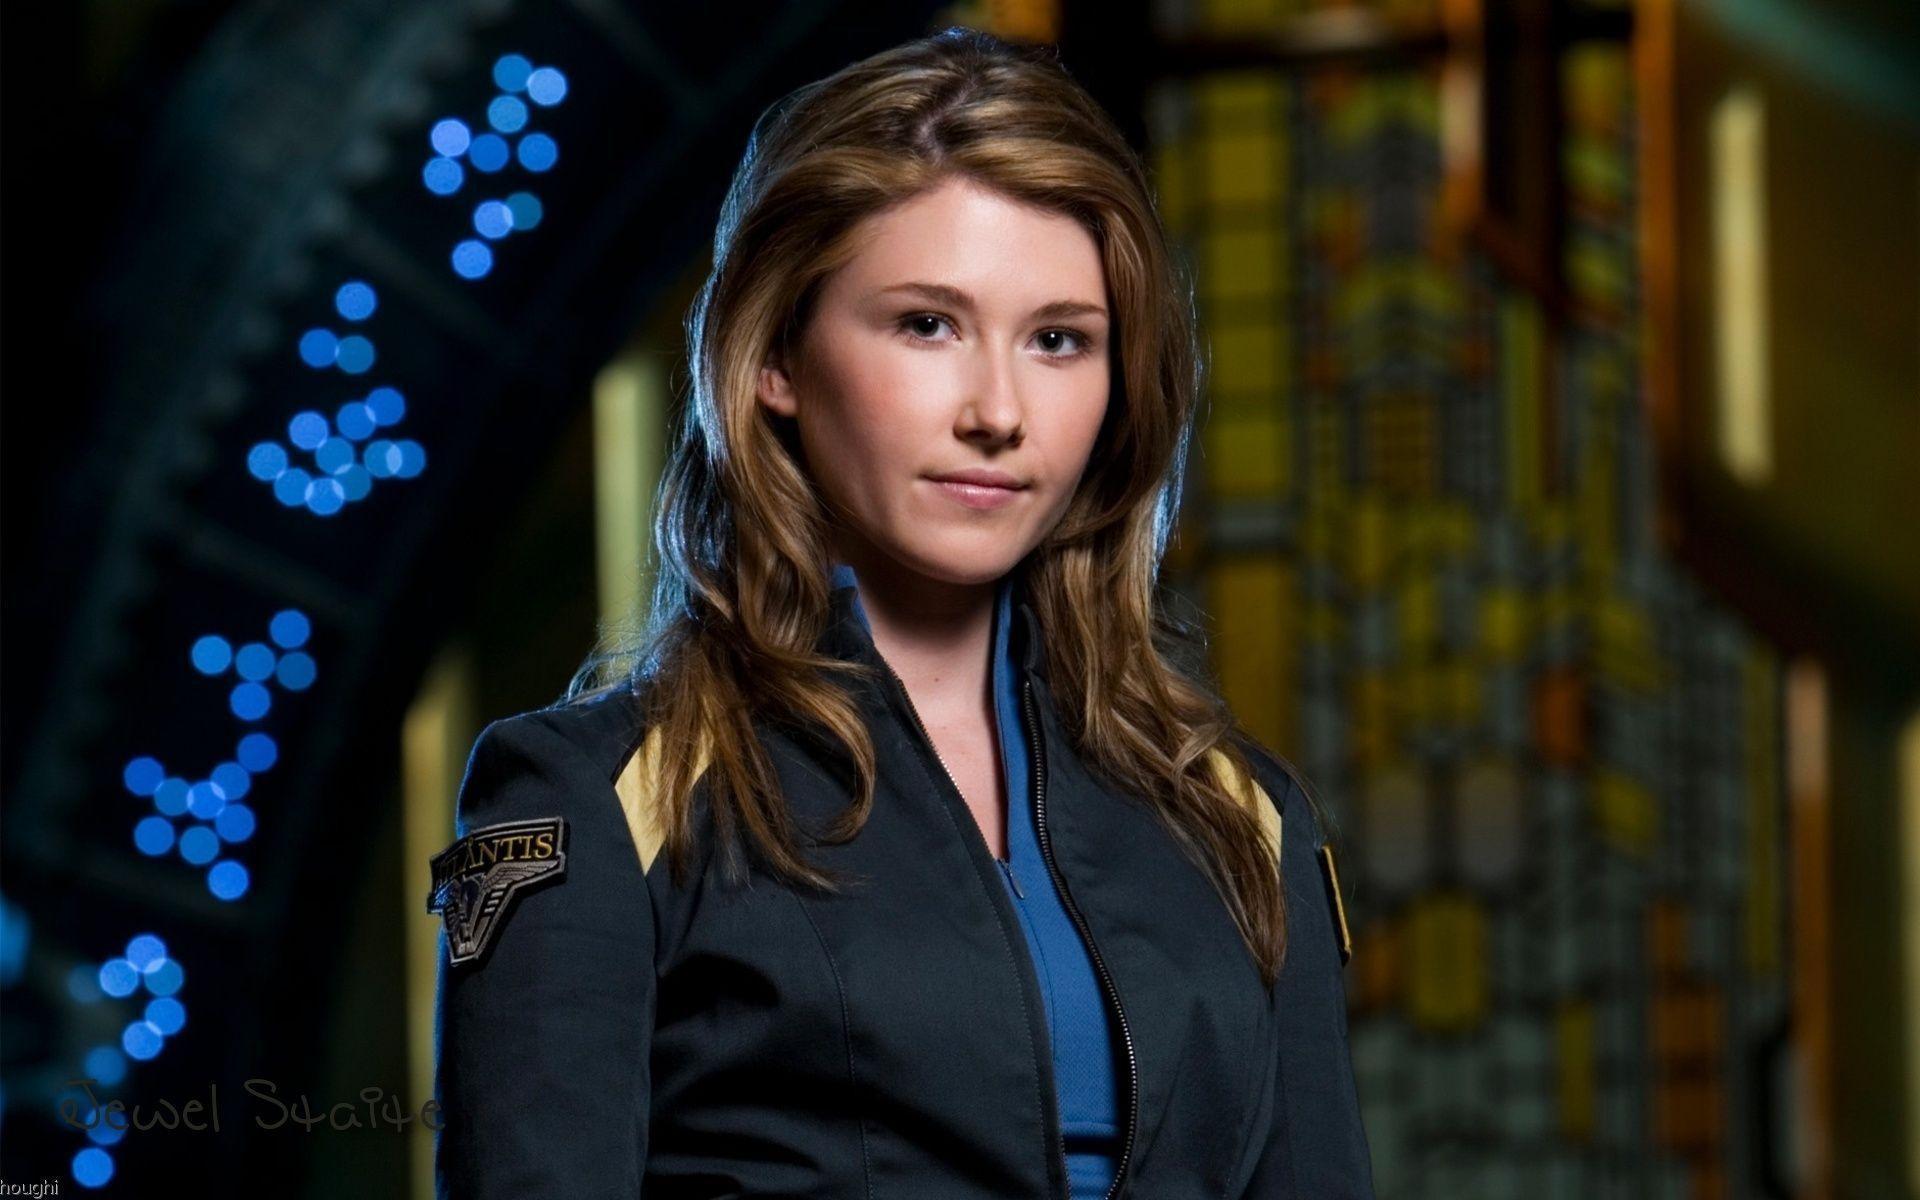 Jewel Staite Wallpapers Wallpaper Cave HD Wallpapers Download Free Map Images Wallpaper [wallpaper376.blogspot.com]